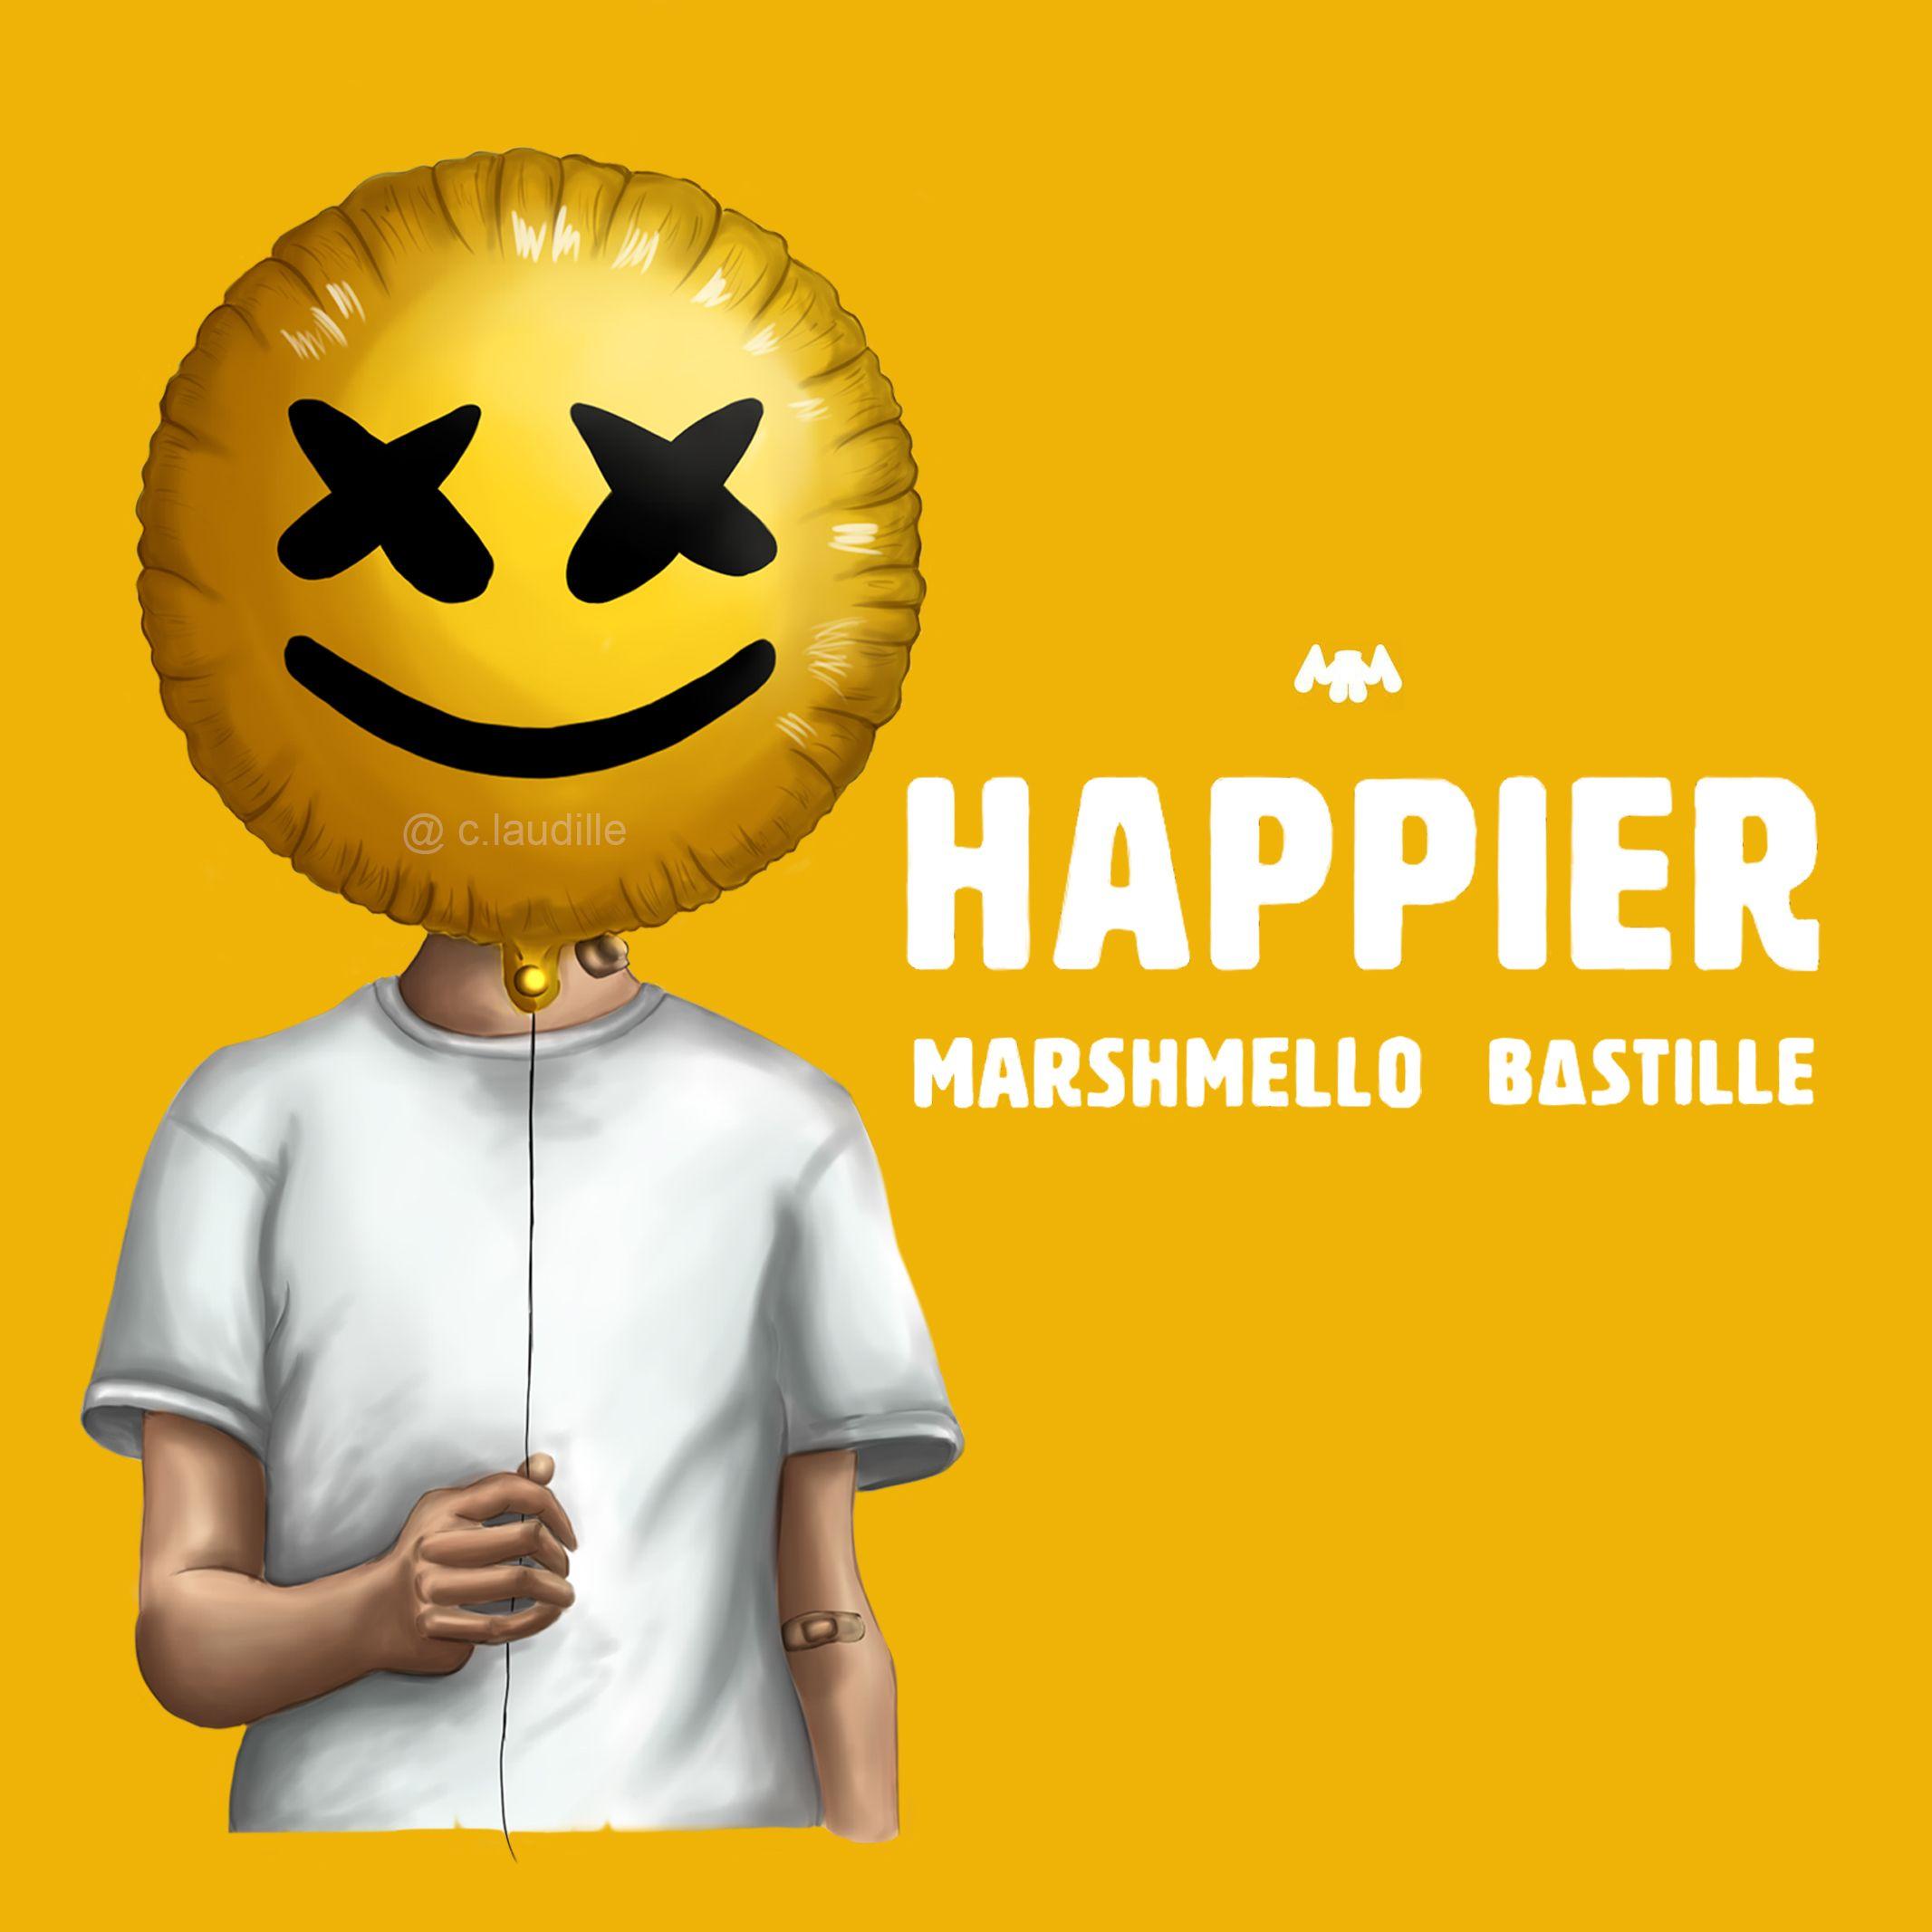 HAPPIER // Marshmello & Bastille. This song is about letting a loved